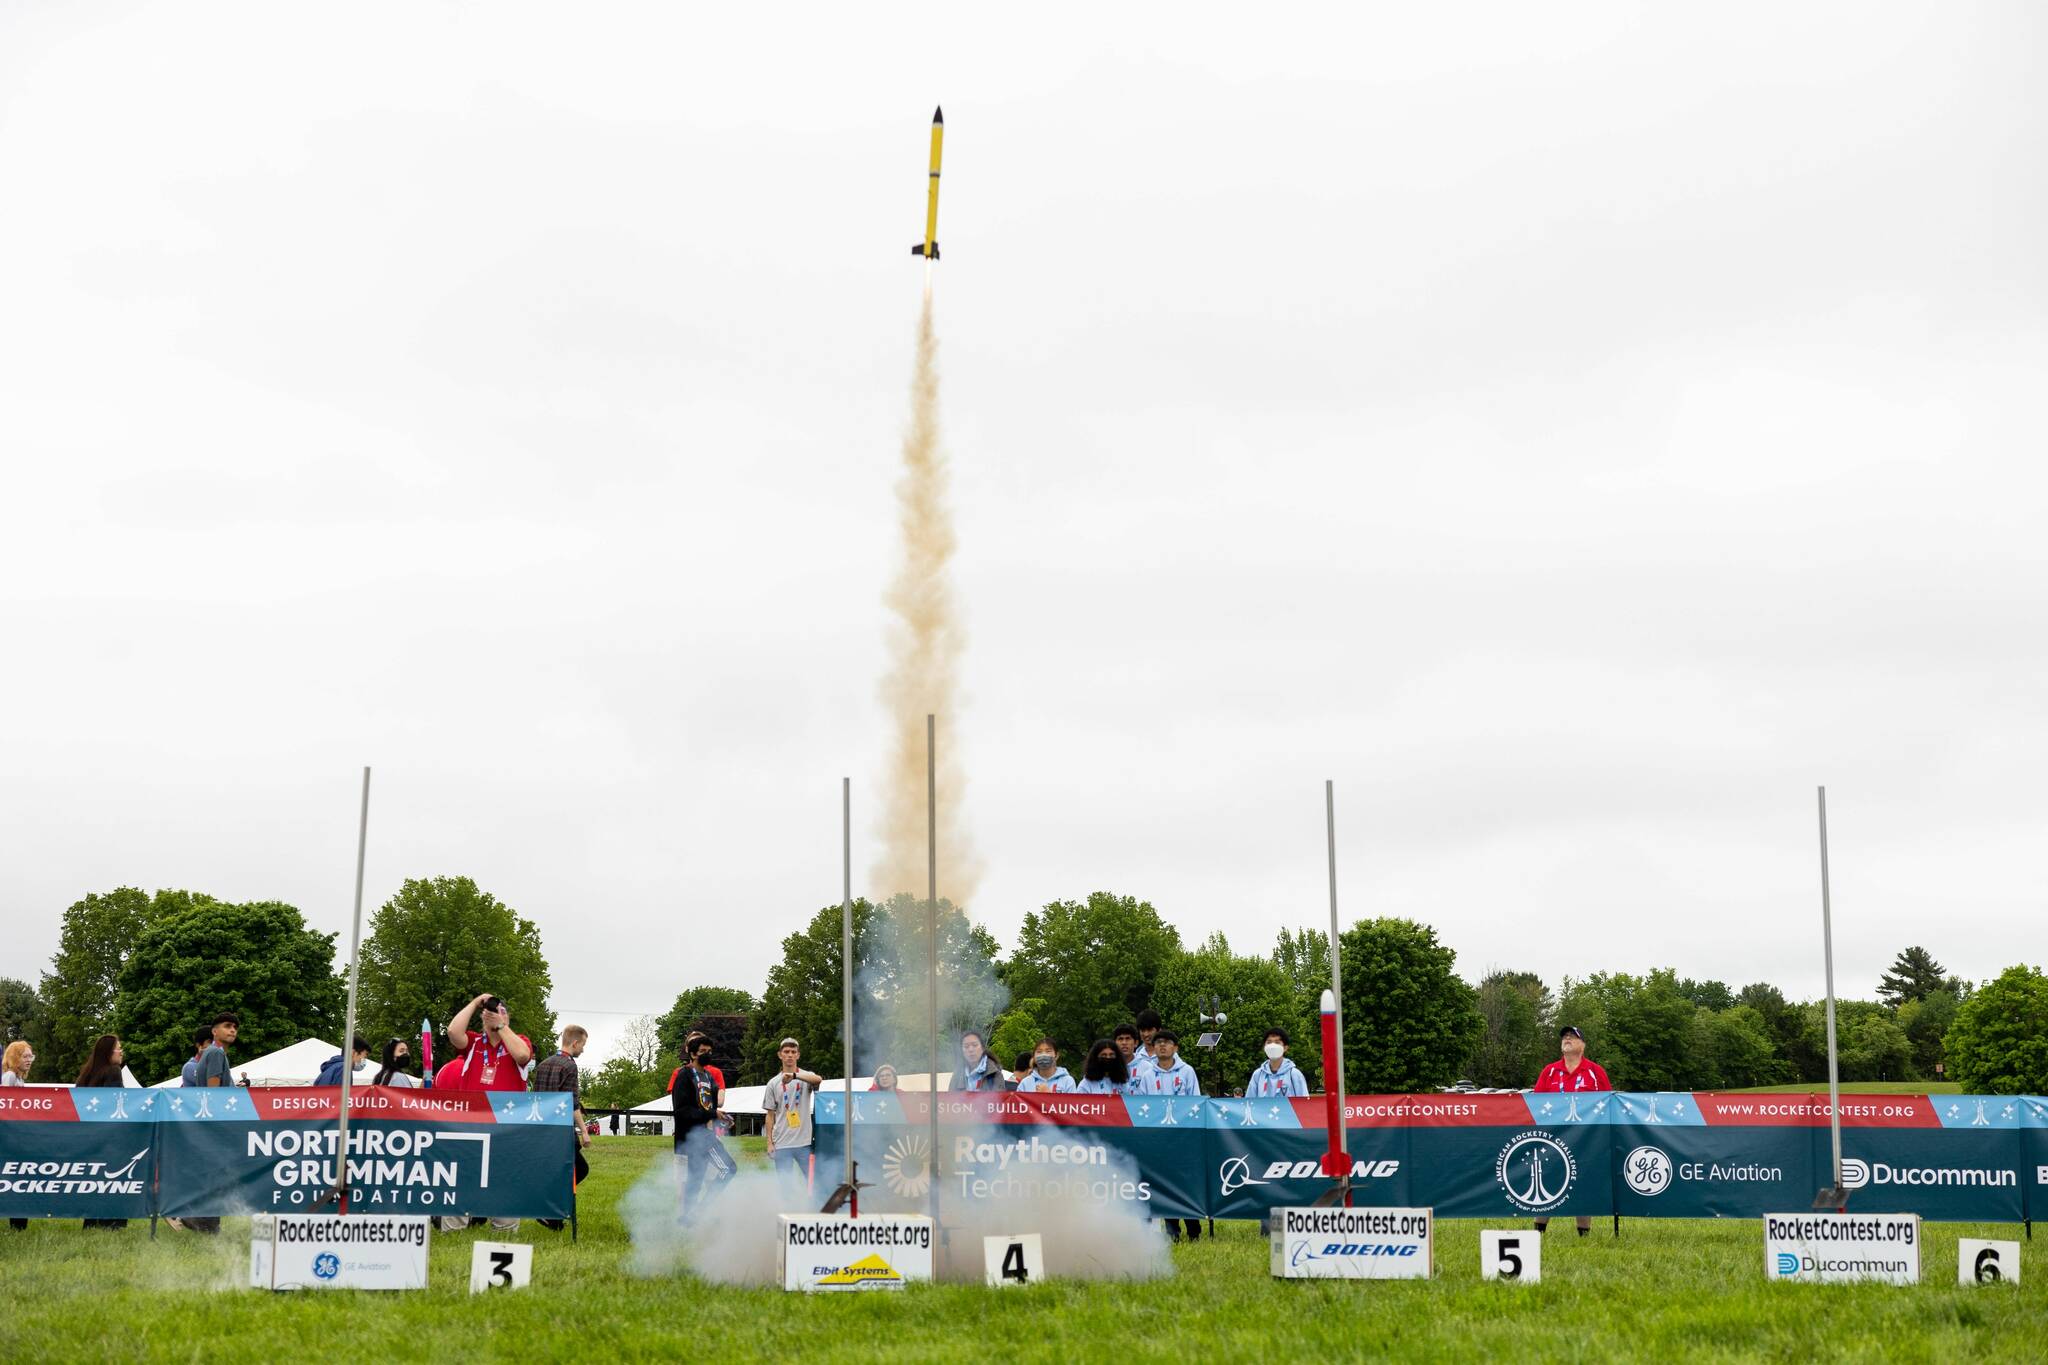 The Newport Team launches their rocket. Courtesy of AIA.